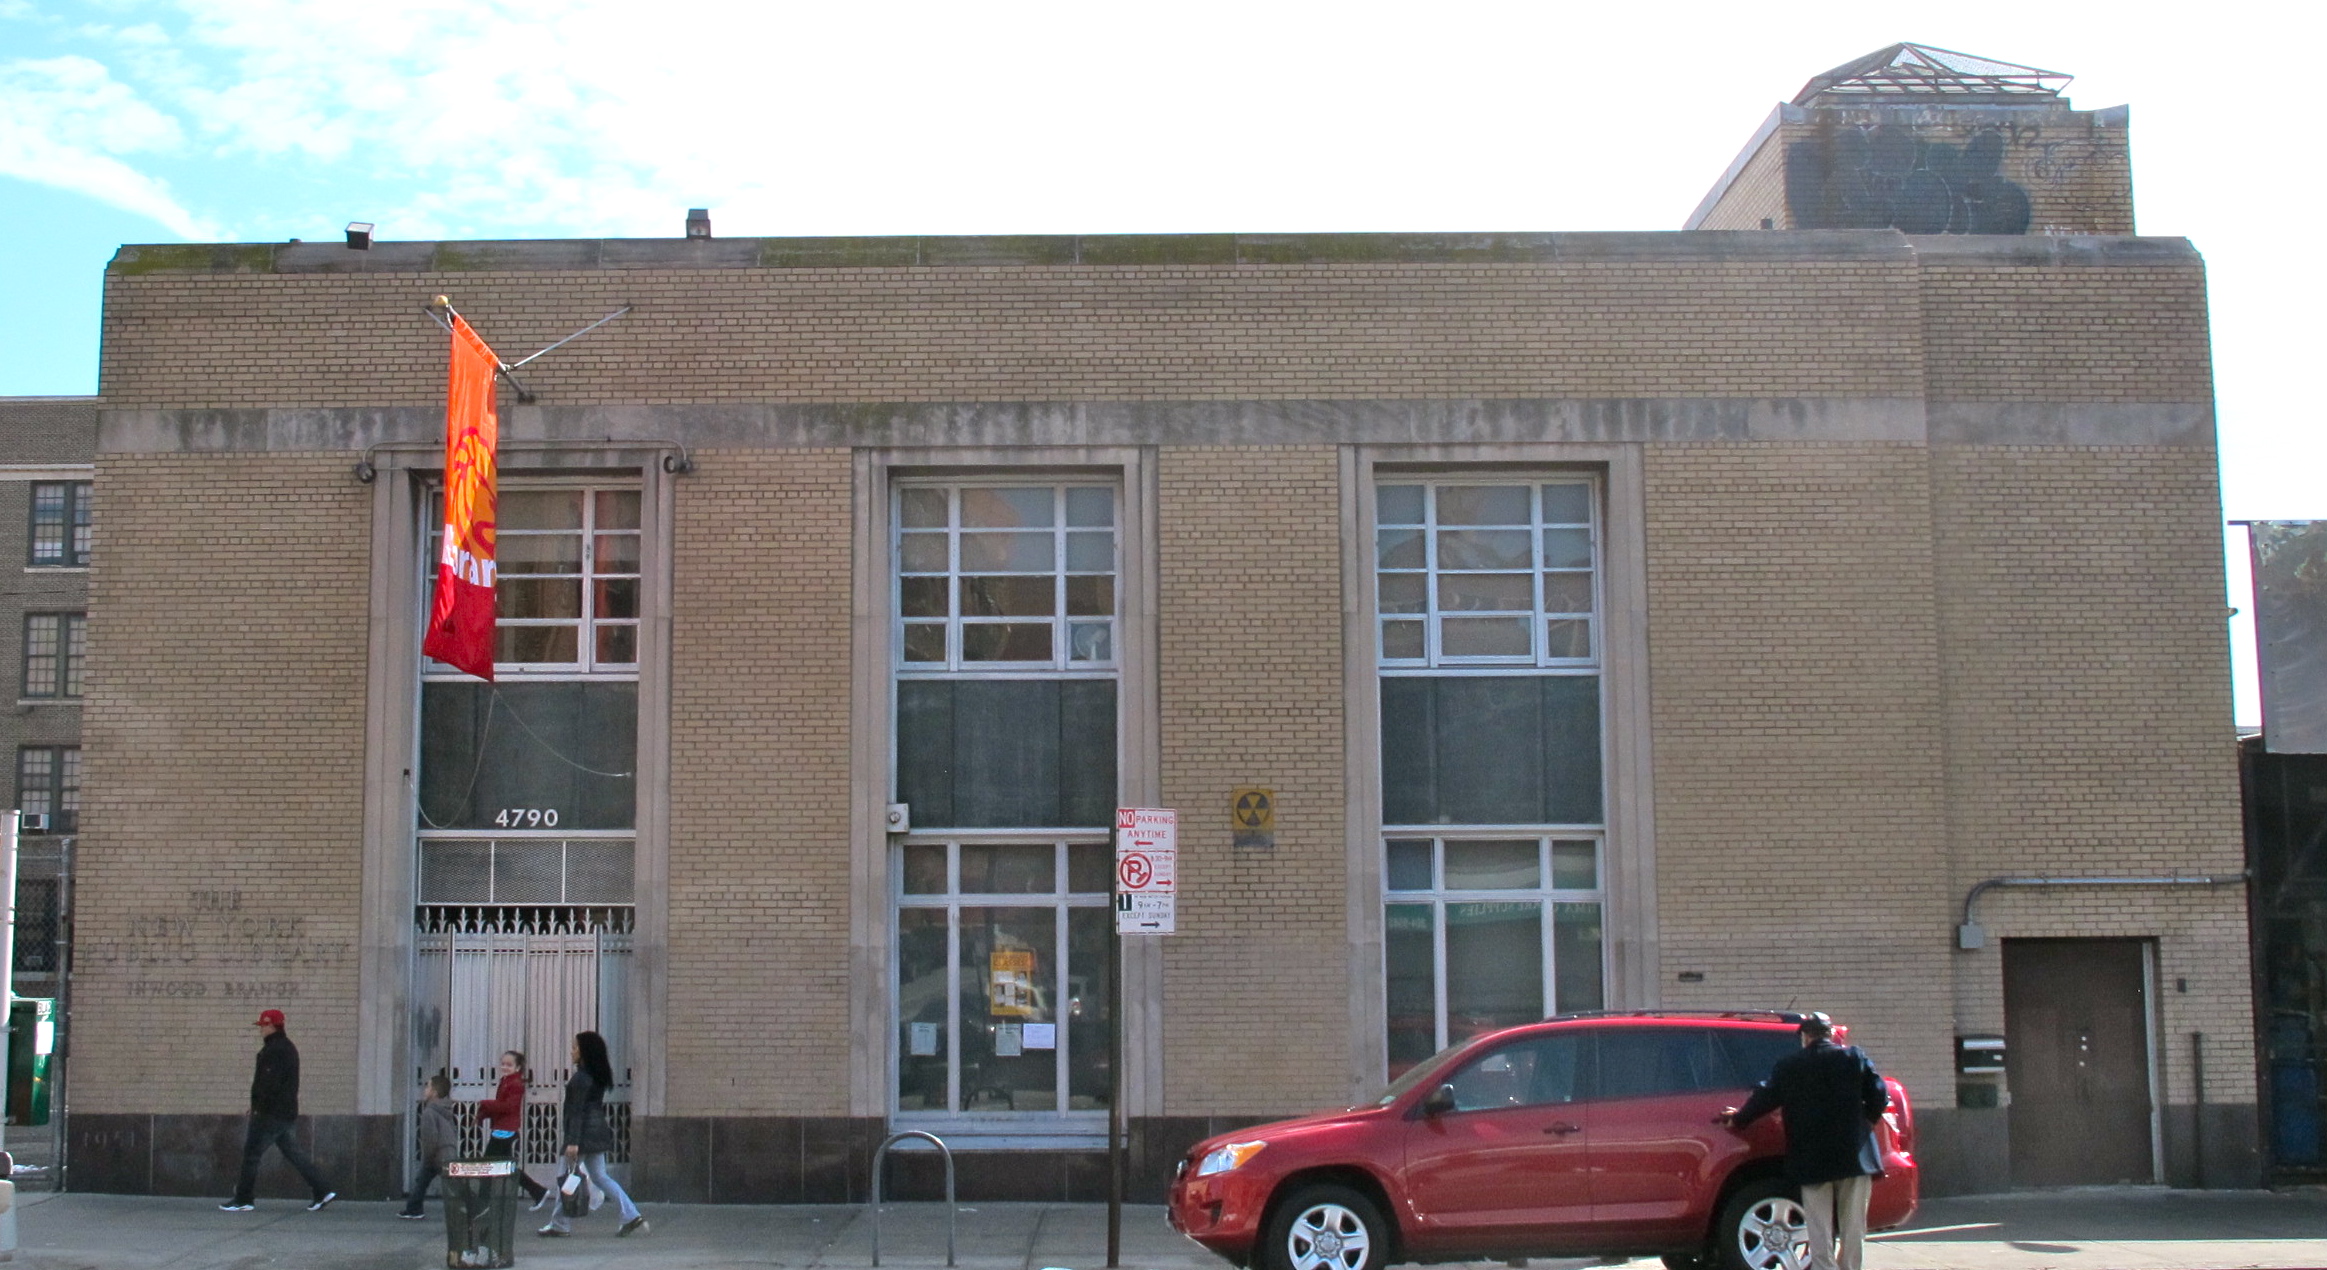 A shot of the exterior facade of a public library building in Inwood.